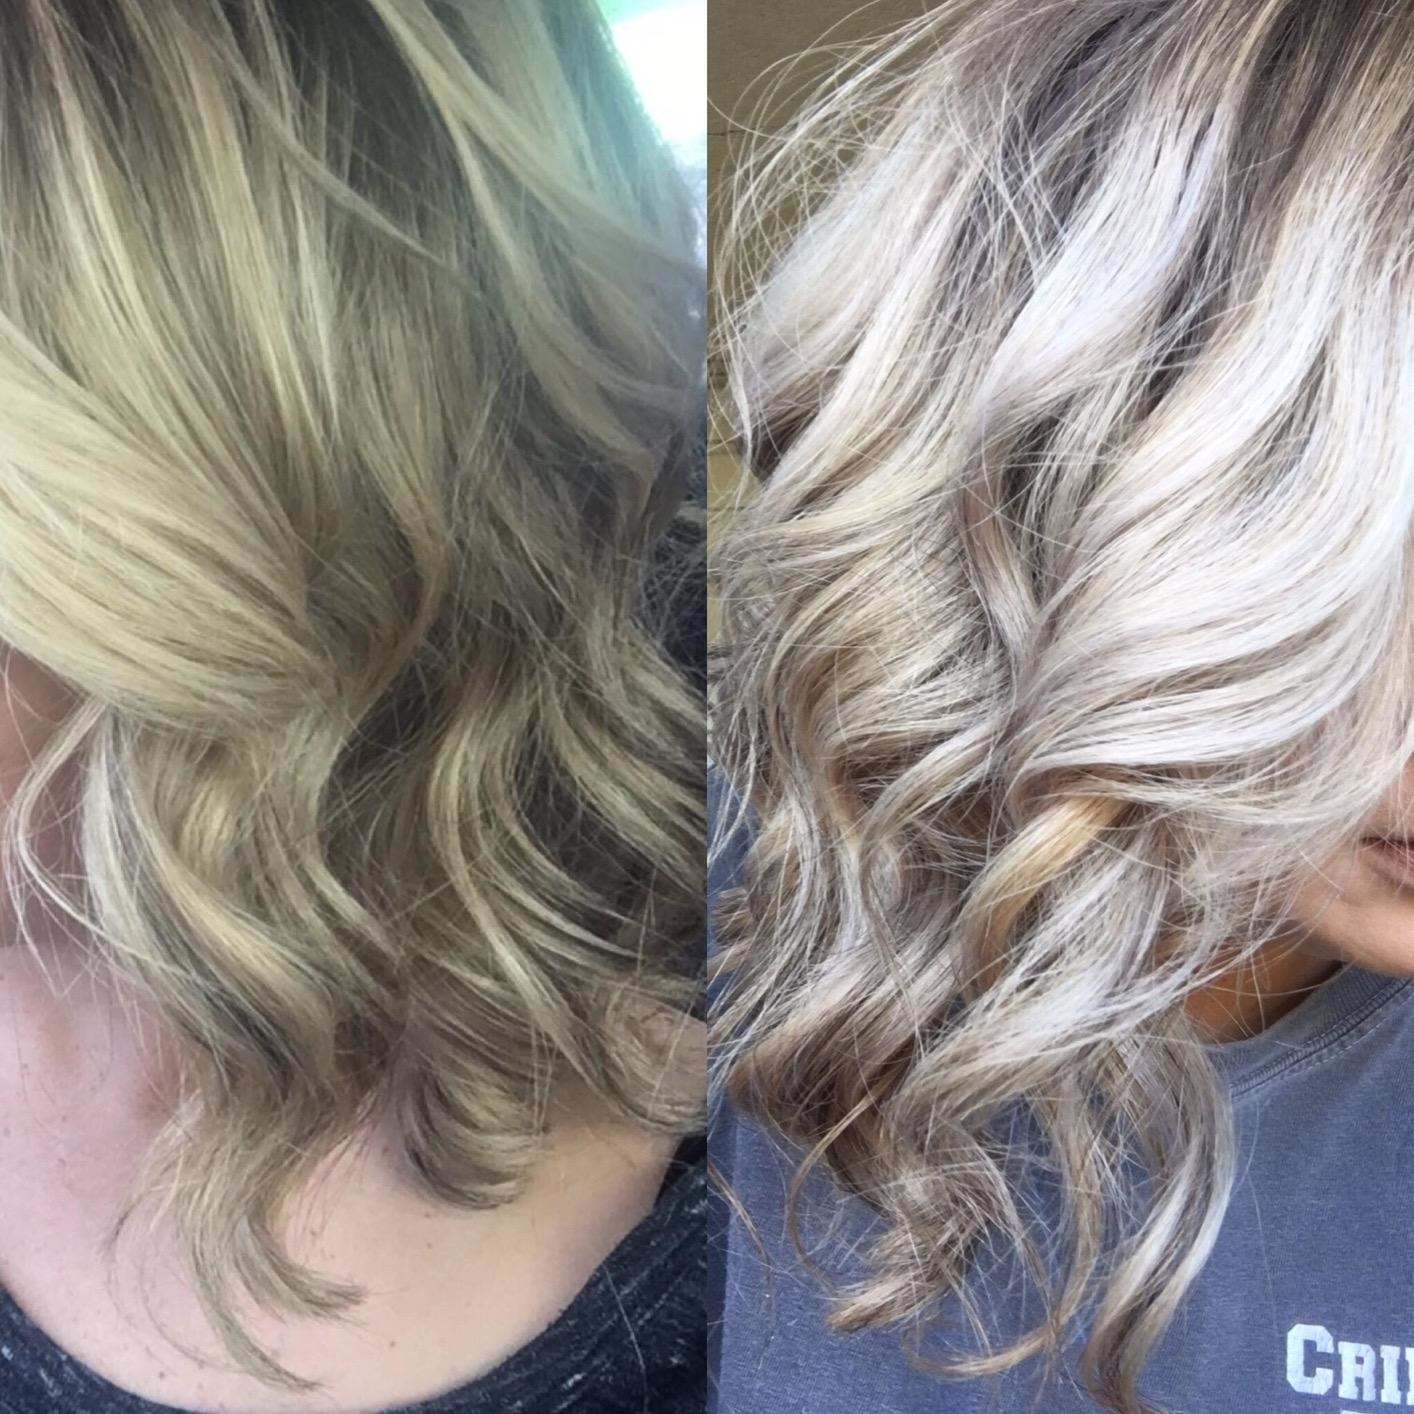 reviewer photo showing their brassy hair on the left, and then their hair looking perfectly platinum on the right 